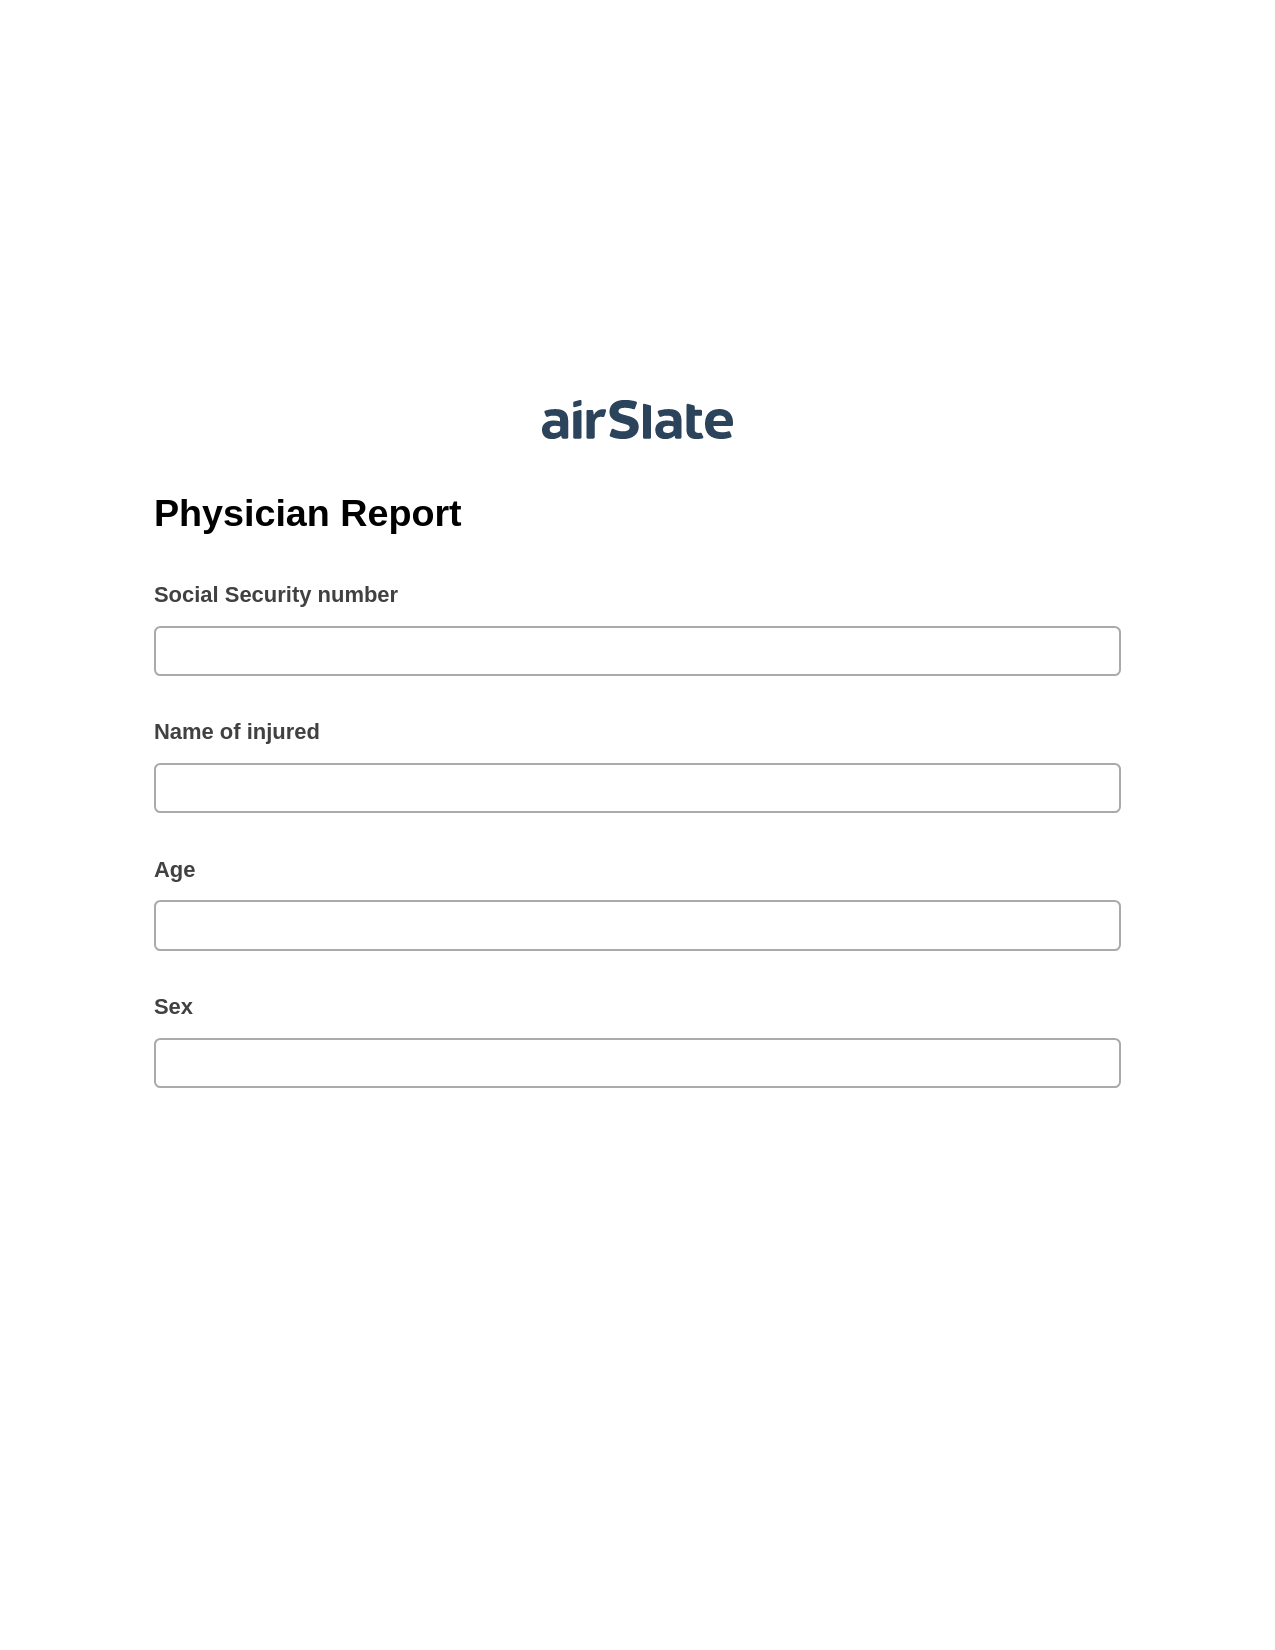 Physician Report Pre-fill from CSV File Bot, Reminder Bot, Export to Salesforce Record Bot